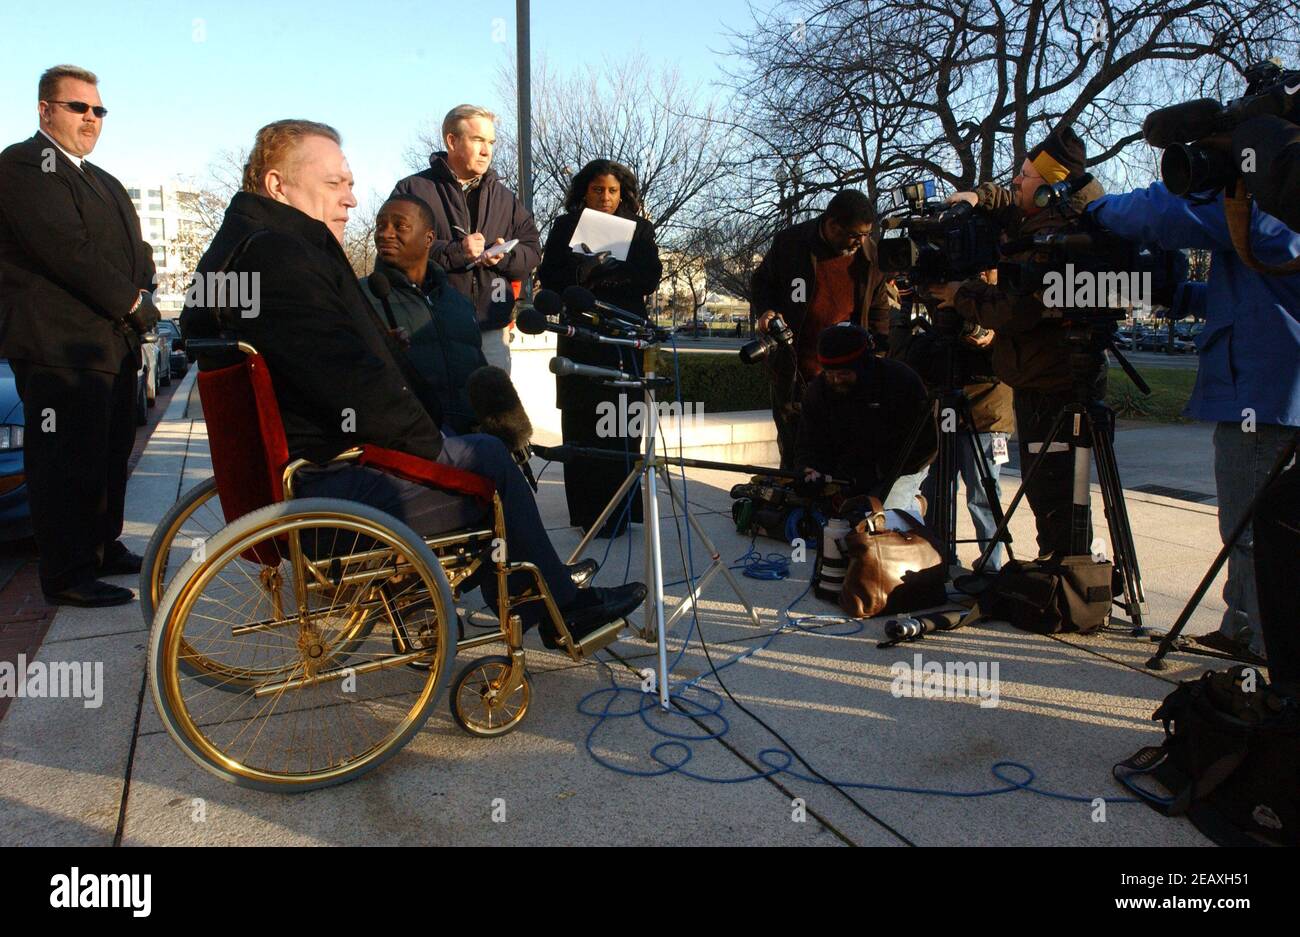 Washington, DC - January 4, 2002 -- Hustler Magazine publisher Larry Flynt appears at United States District Court in Washington, D.C. to plead his case against the United States Department of Defense.  Flynt wants the court to order the battlefields in Afghanistan opened to the media. Credit: Ron Sachs / CNP /MediaPunch Stock Photo